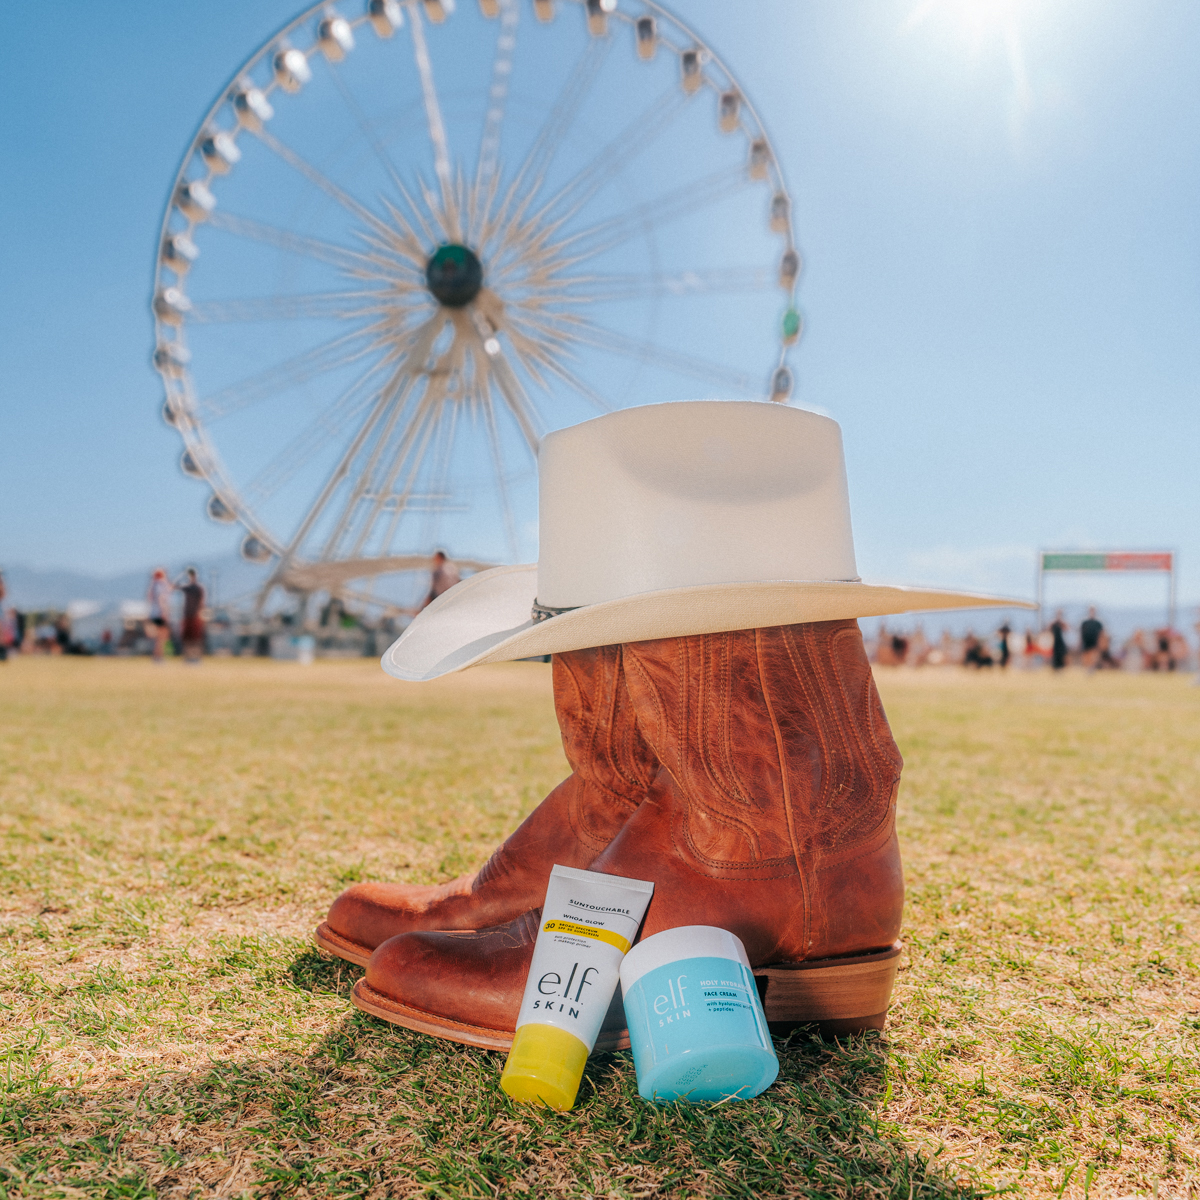 Grab your cowboy boots because it's time to mosey on over to @Stagecoach! 🤠✨

Check into the e.l.f. SKIN Glow & Go Motel, where we’ll be serving up high-key skincare for low-key prices!🛎️ You might even check out with some free goodies 😉

🗓️ Friday, 4/26 to Sunday, 4/28
⏰